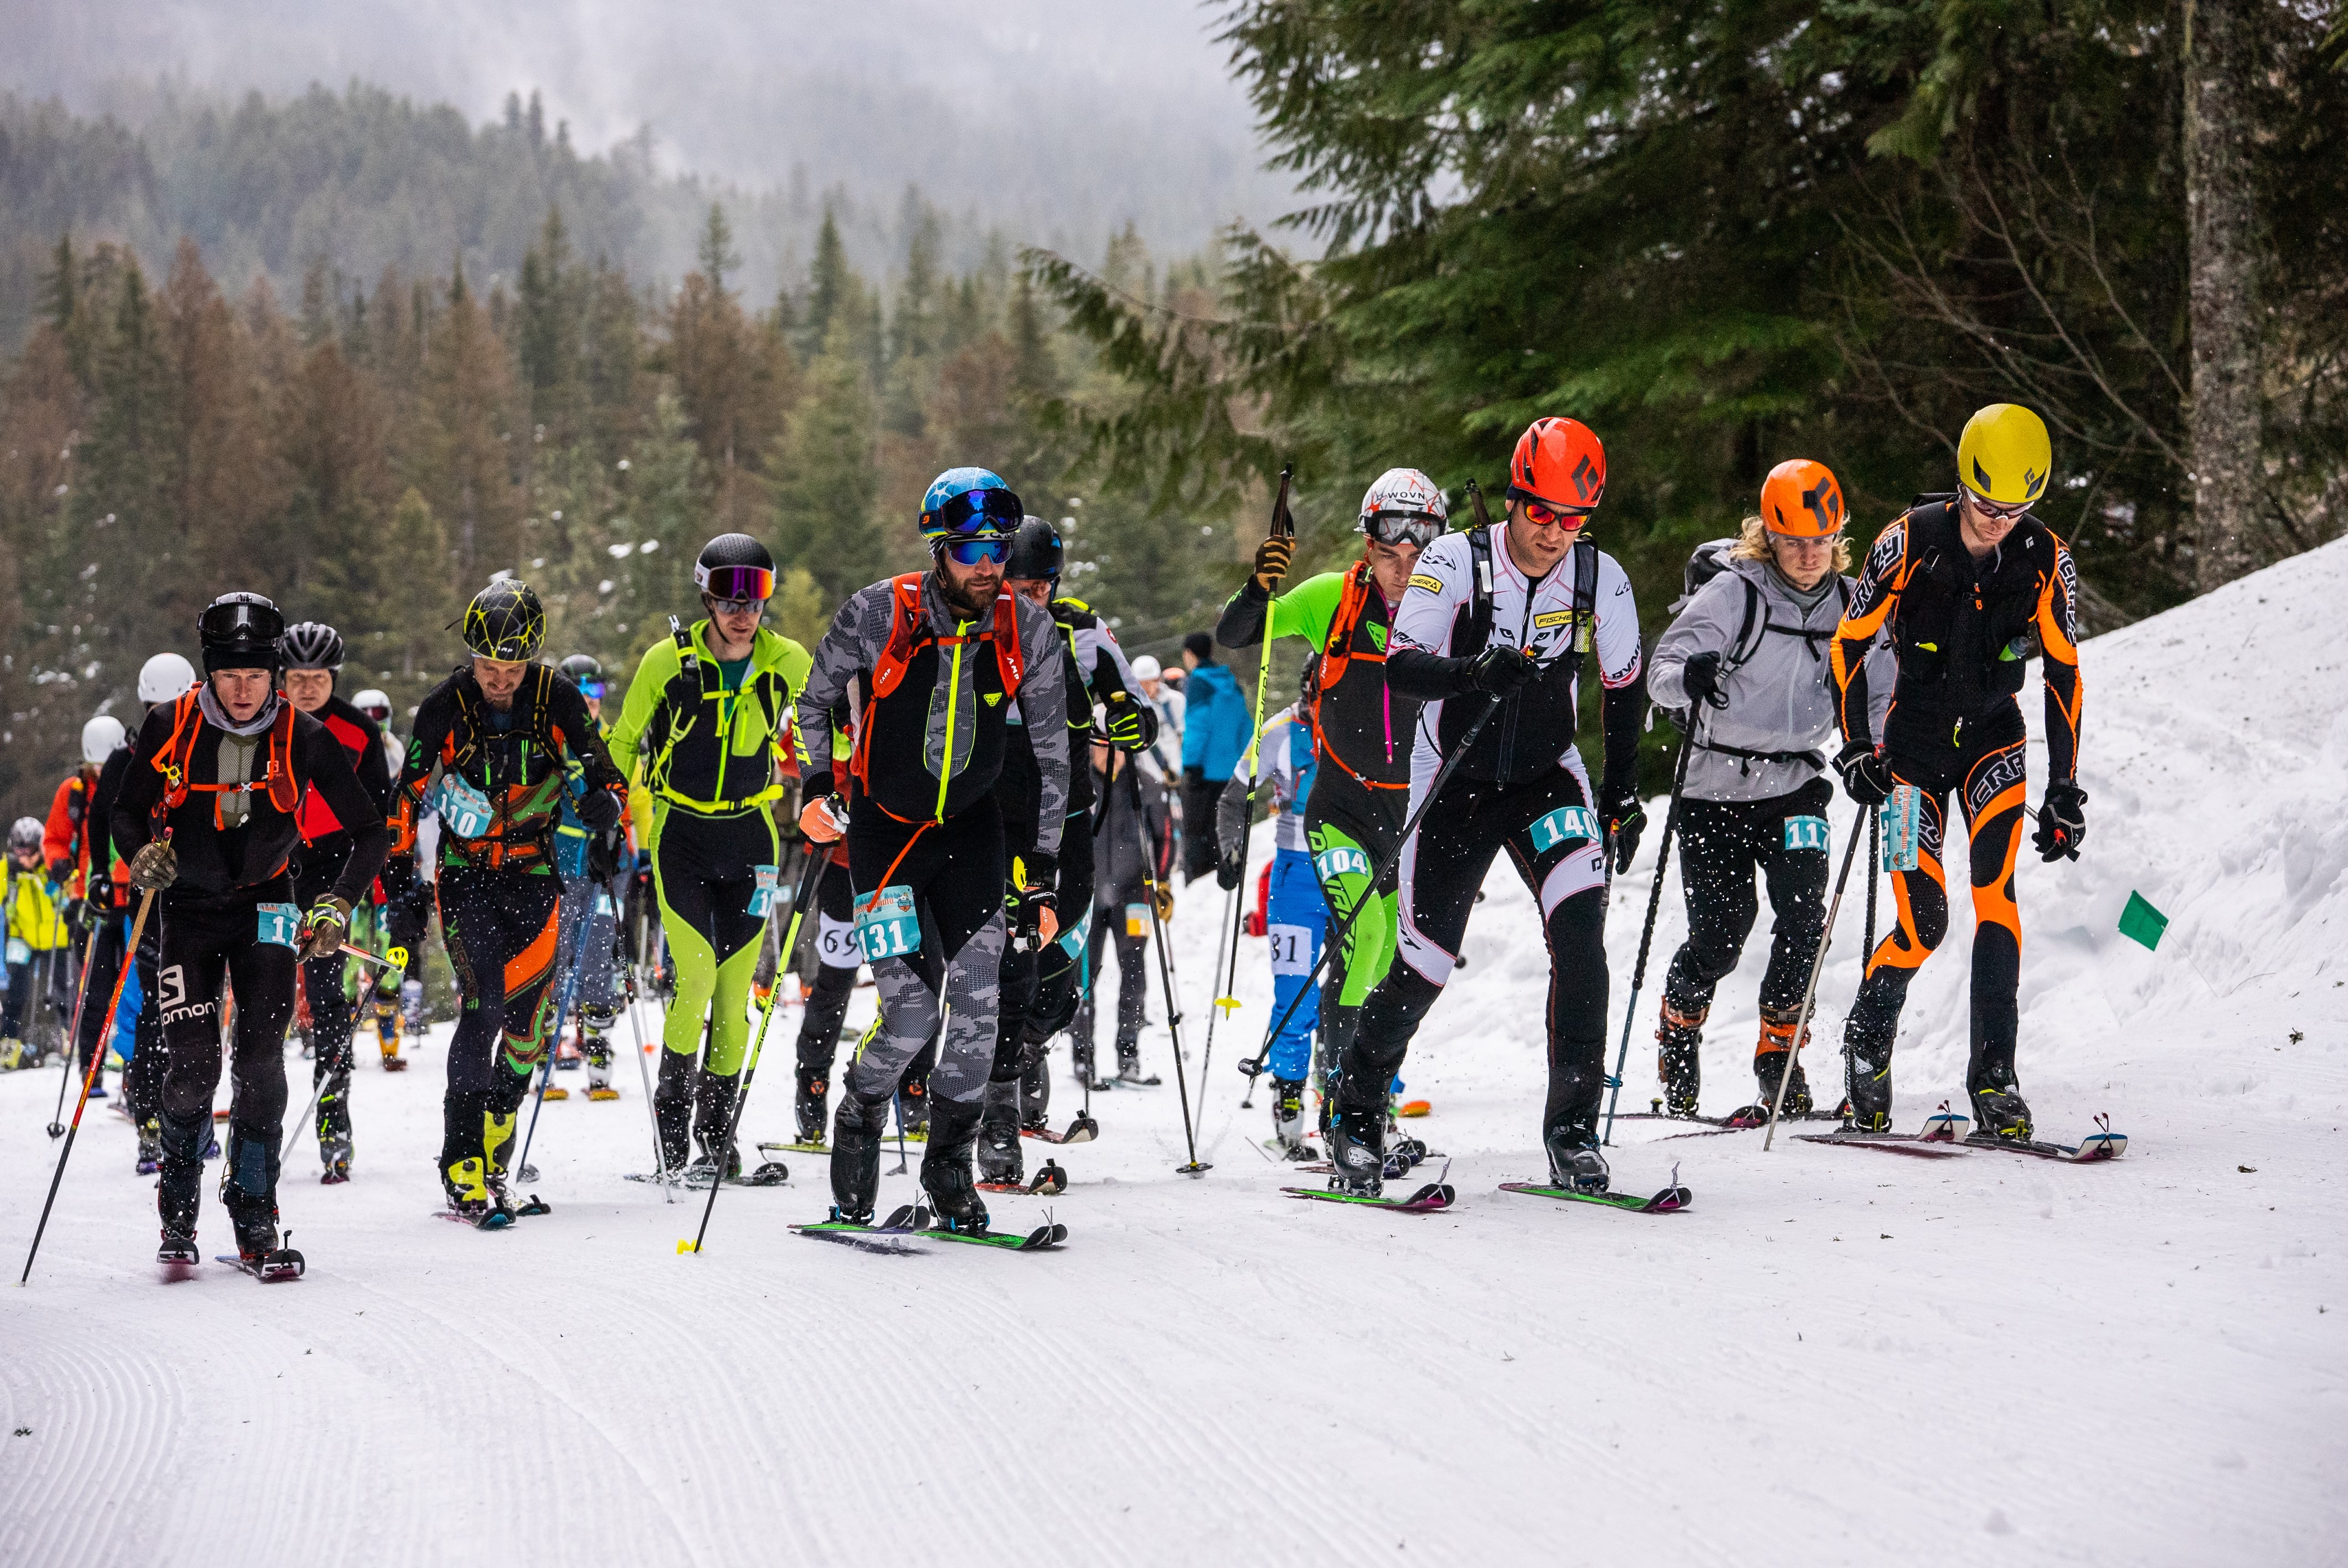 If you like a grueling uphill race on skis, skimo may be the sport for you 